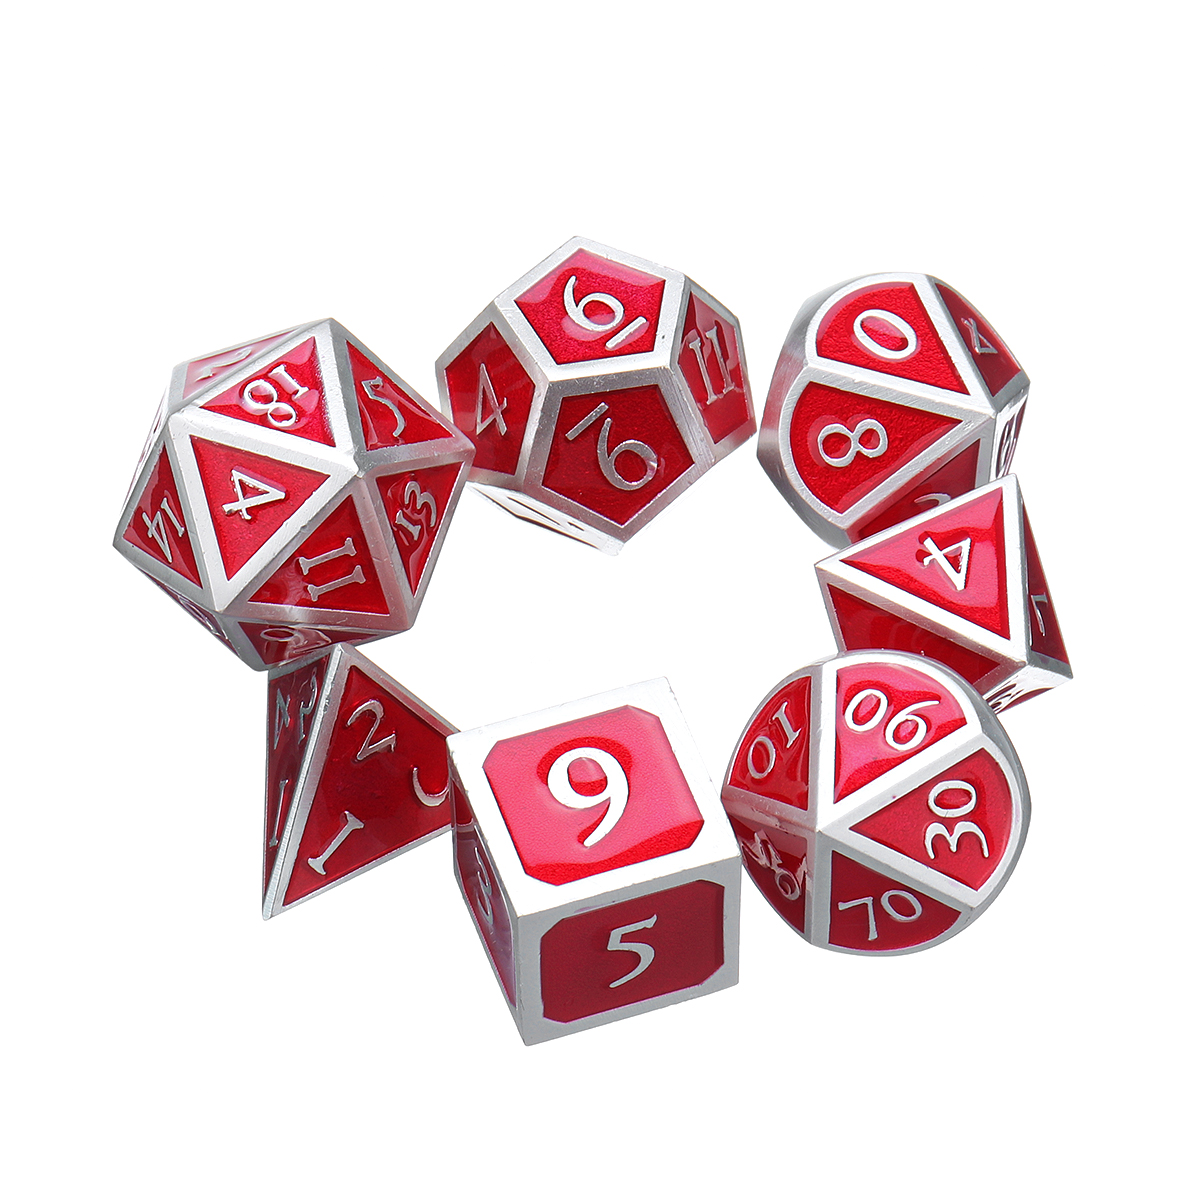 Red-Antique-Color-Solid-Metal-Polyhedral-Dices-Role-Playing-RPG-Gadget-7-Dice-Set-With-Bag-1425967-1